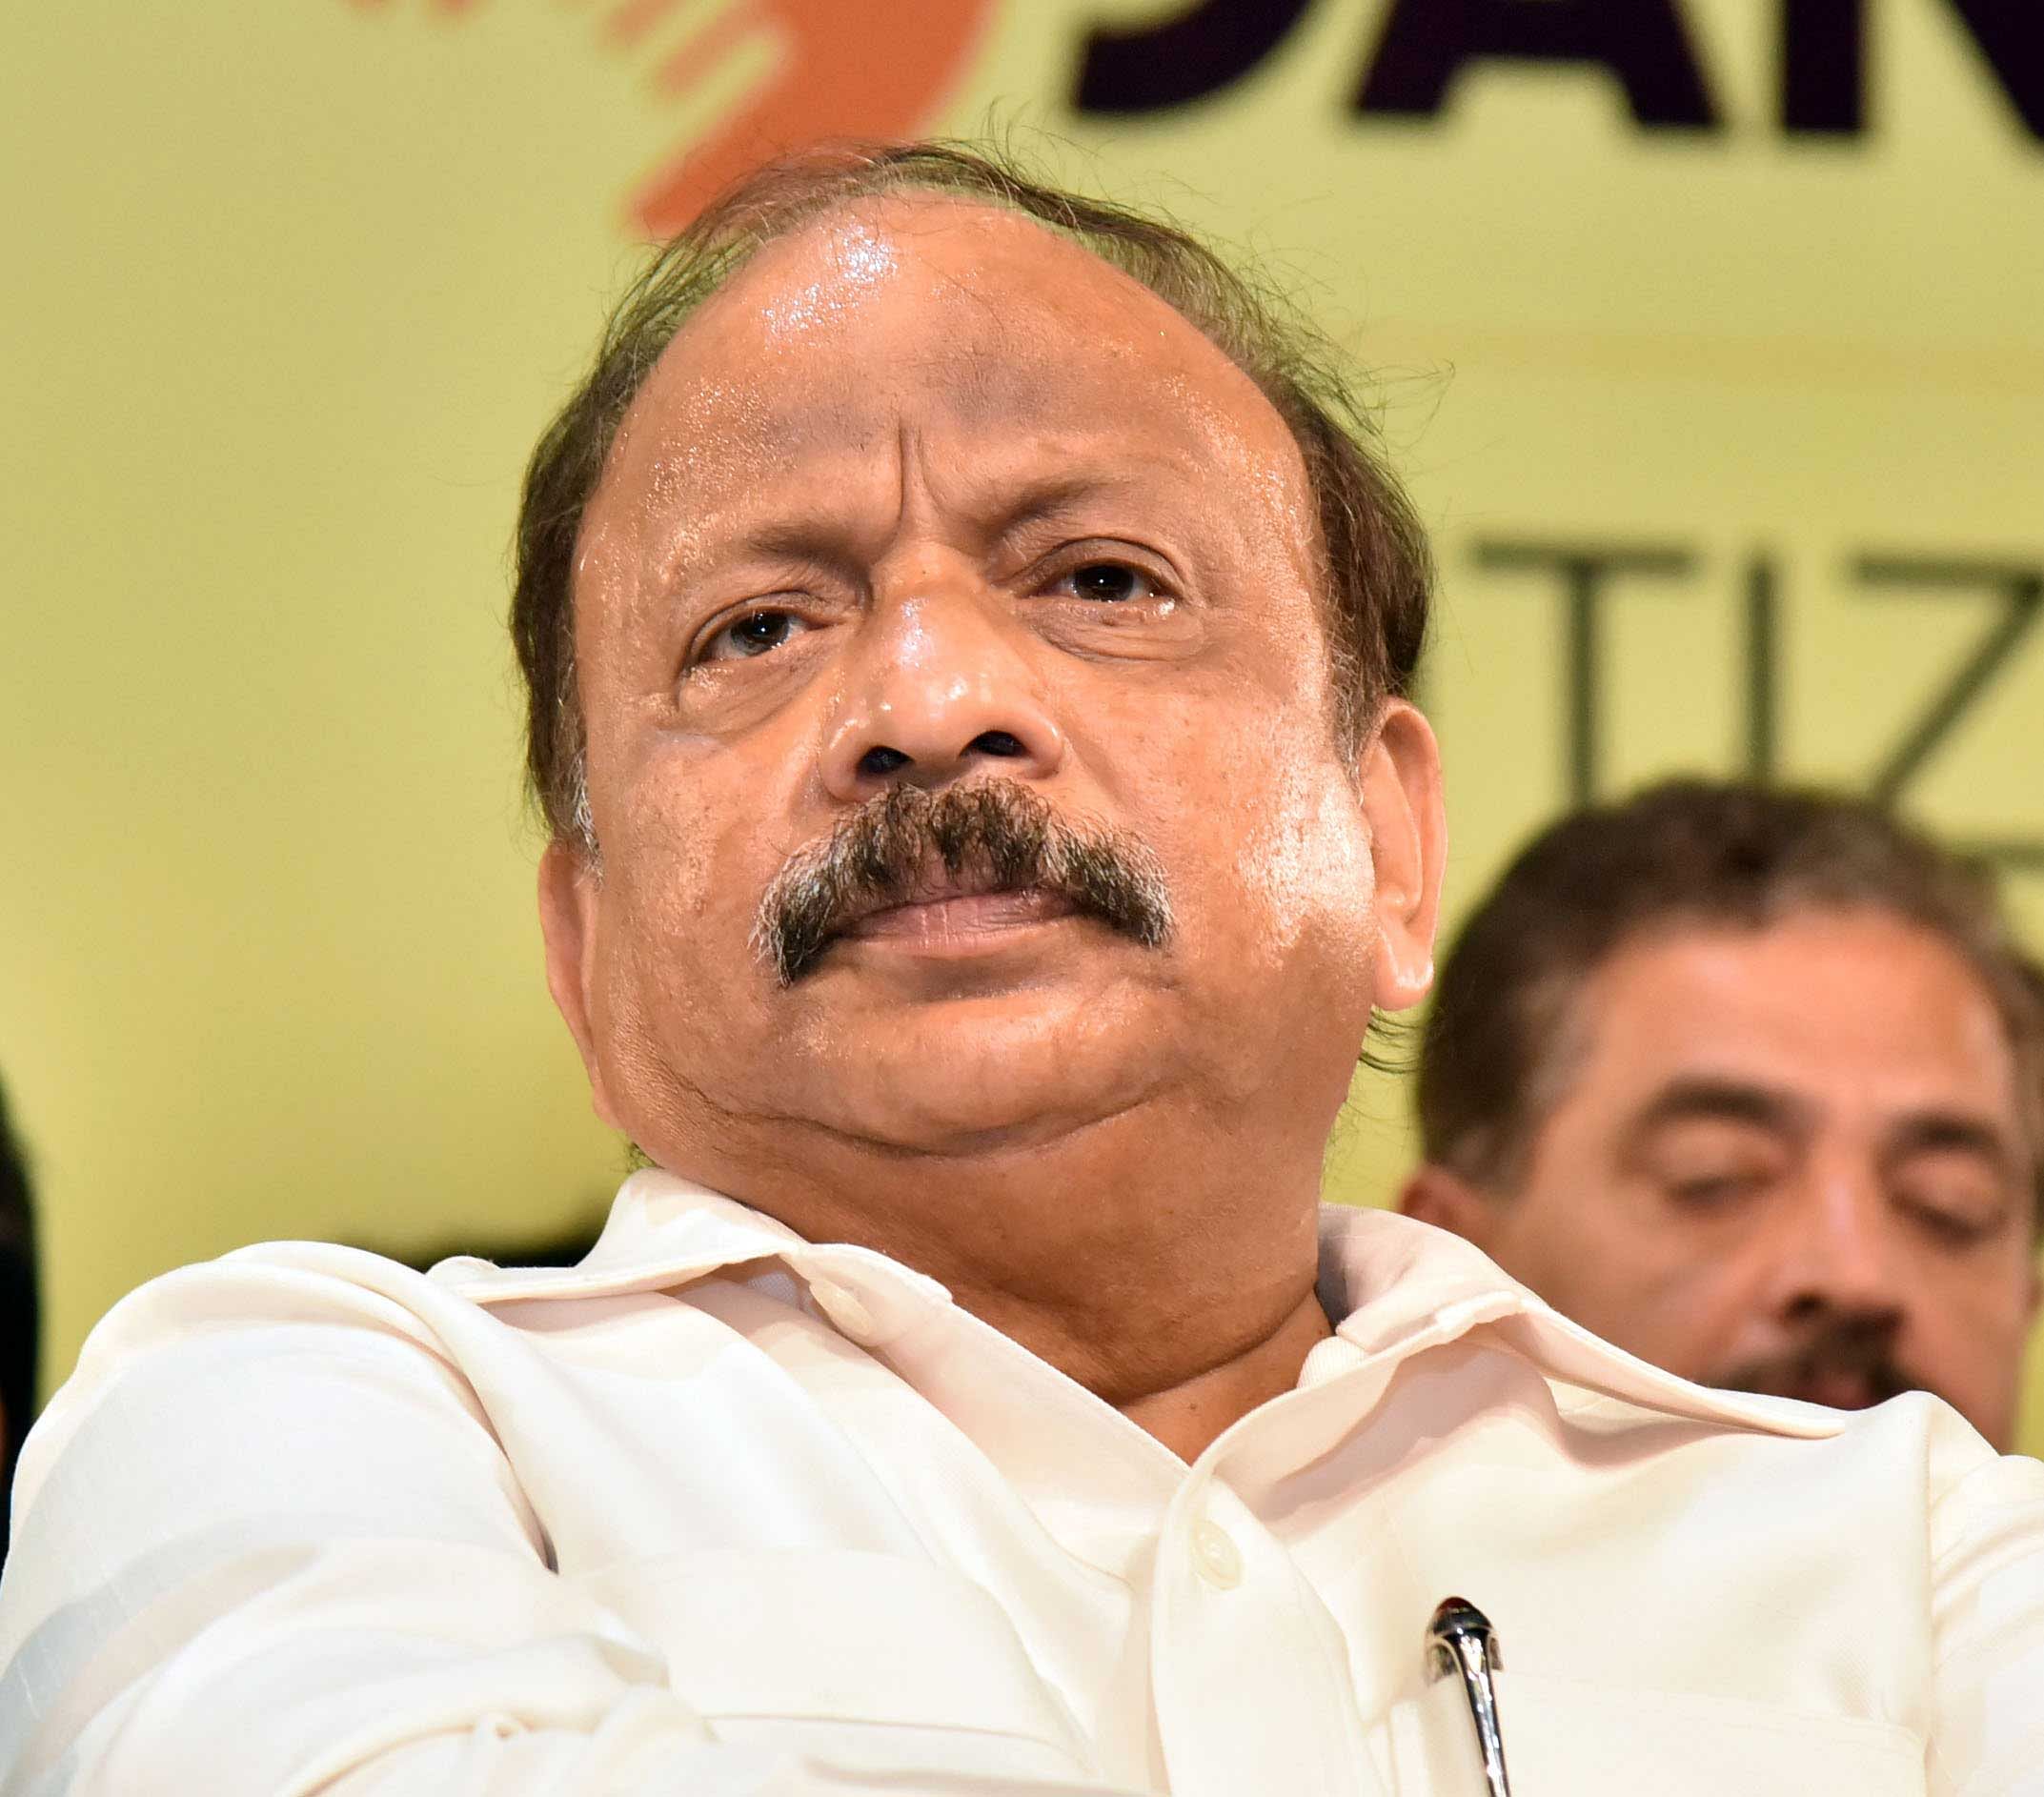 Karnataka's Urban Development Minister R Roshan Baig is in the dock after a video surfaced Friday where he is heard using an obscene word while referring to Prime Minister Narendra Modi. The Karnataka BJP has demanded that he be sacked.  DH file photo